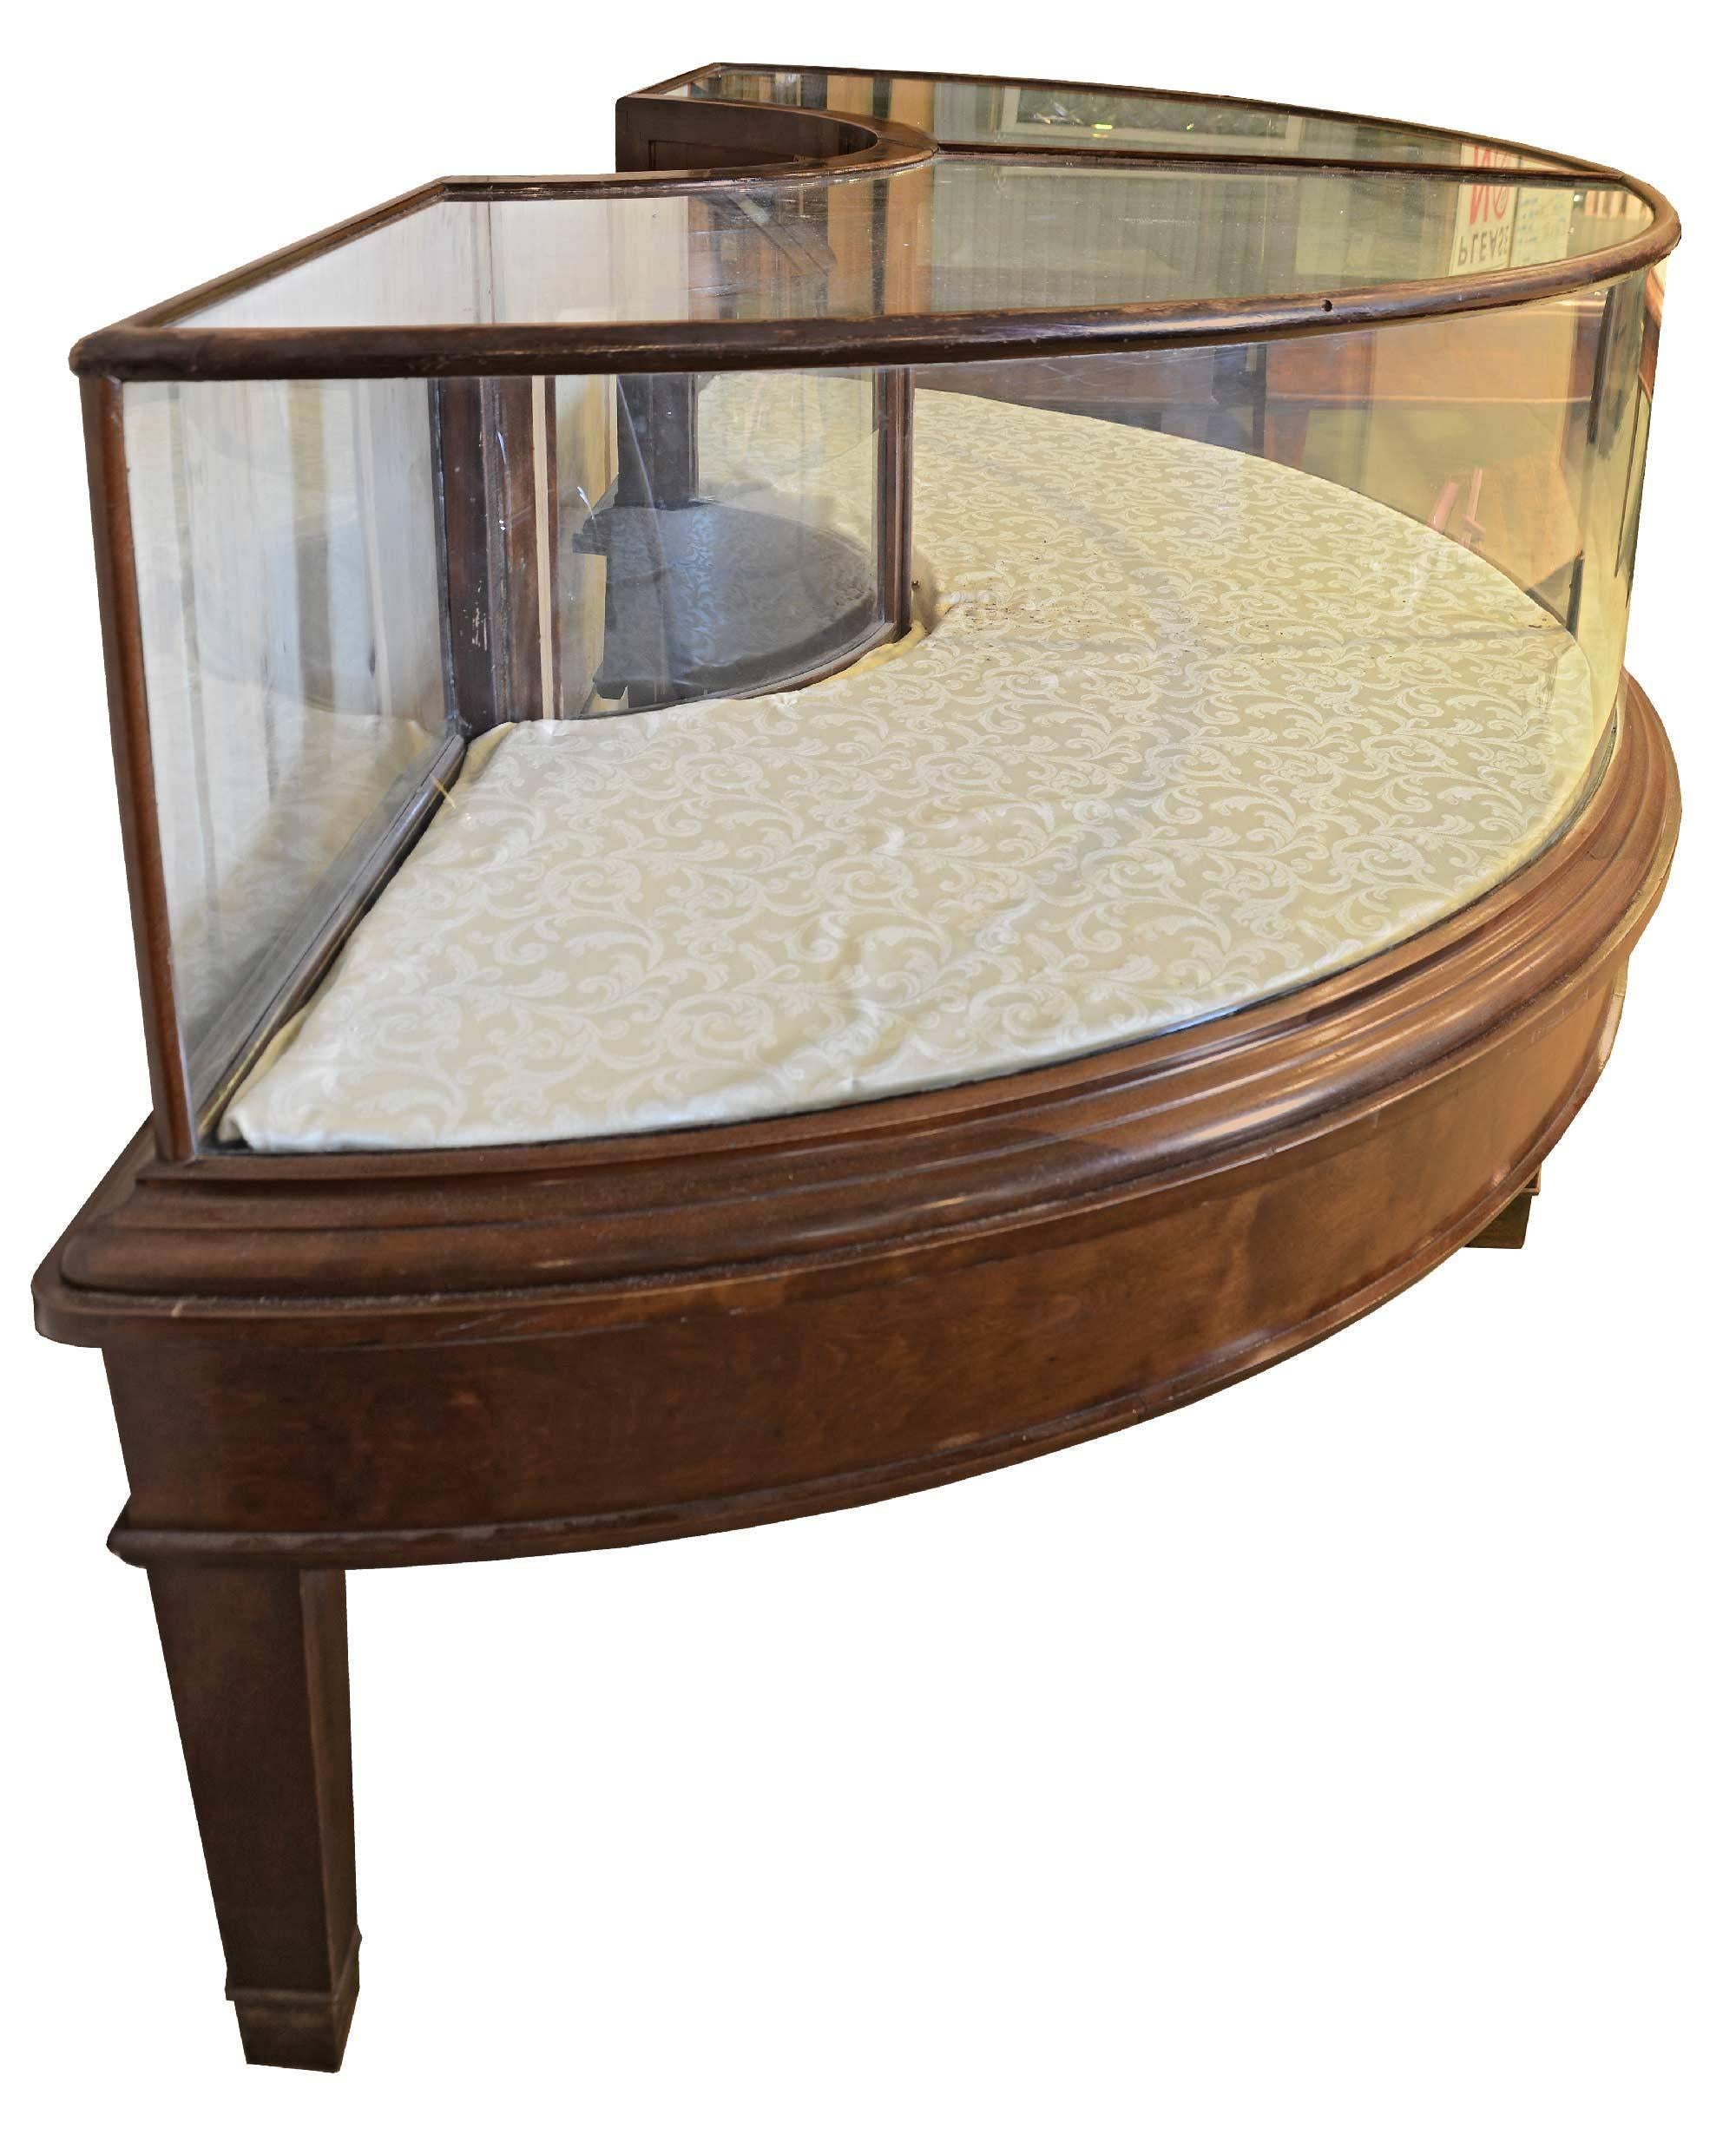 This display case is made of mahogany and curved glass, with curved doors in the back that slide down. Manufactured by C.F. Jorgeson & Co of Chicago, IL.

Measures: 86